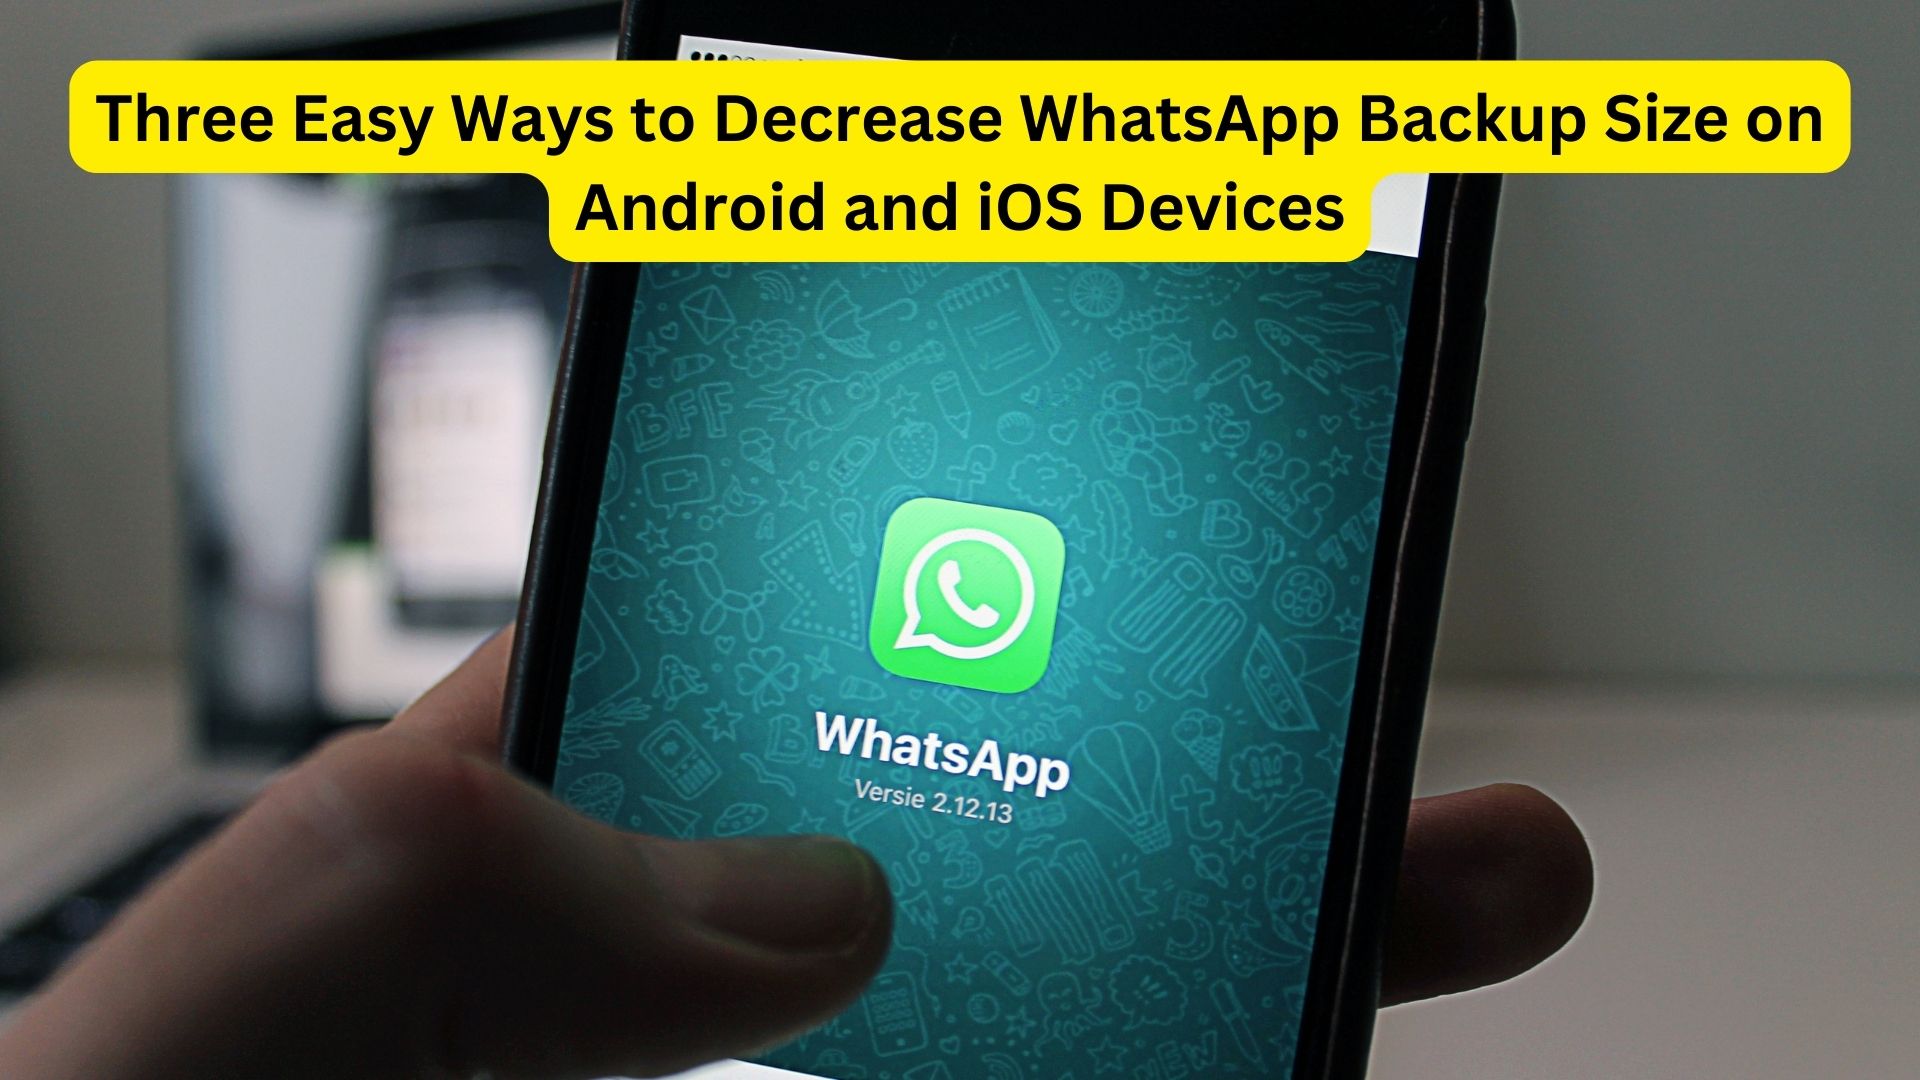 Three Easy Ways to Decrease WhatsApp Backup Size on Android and iOS Devices